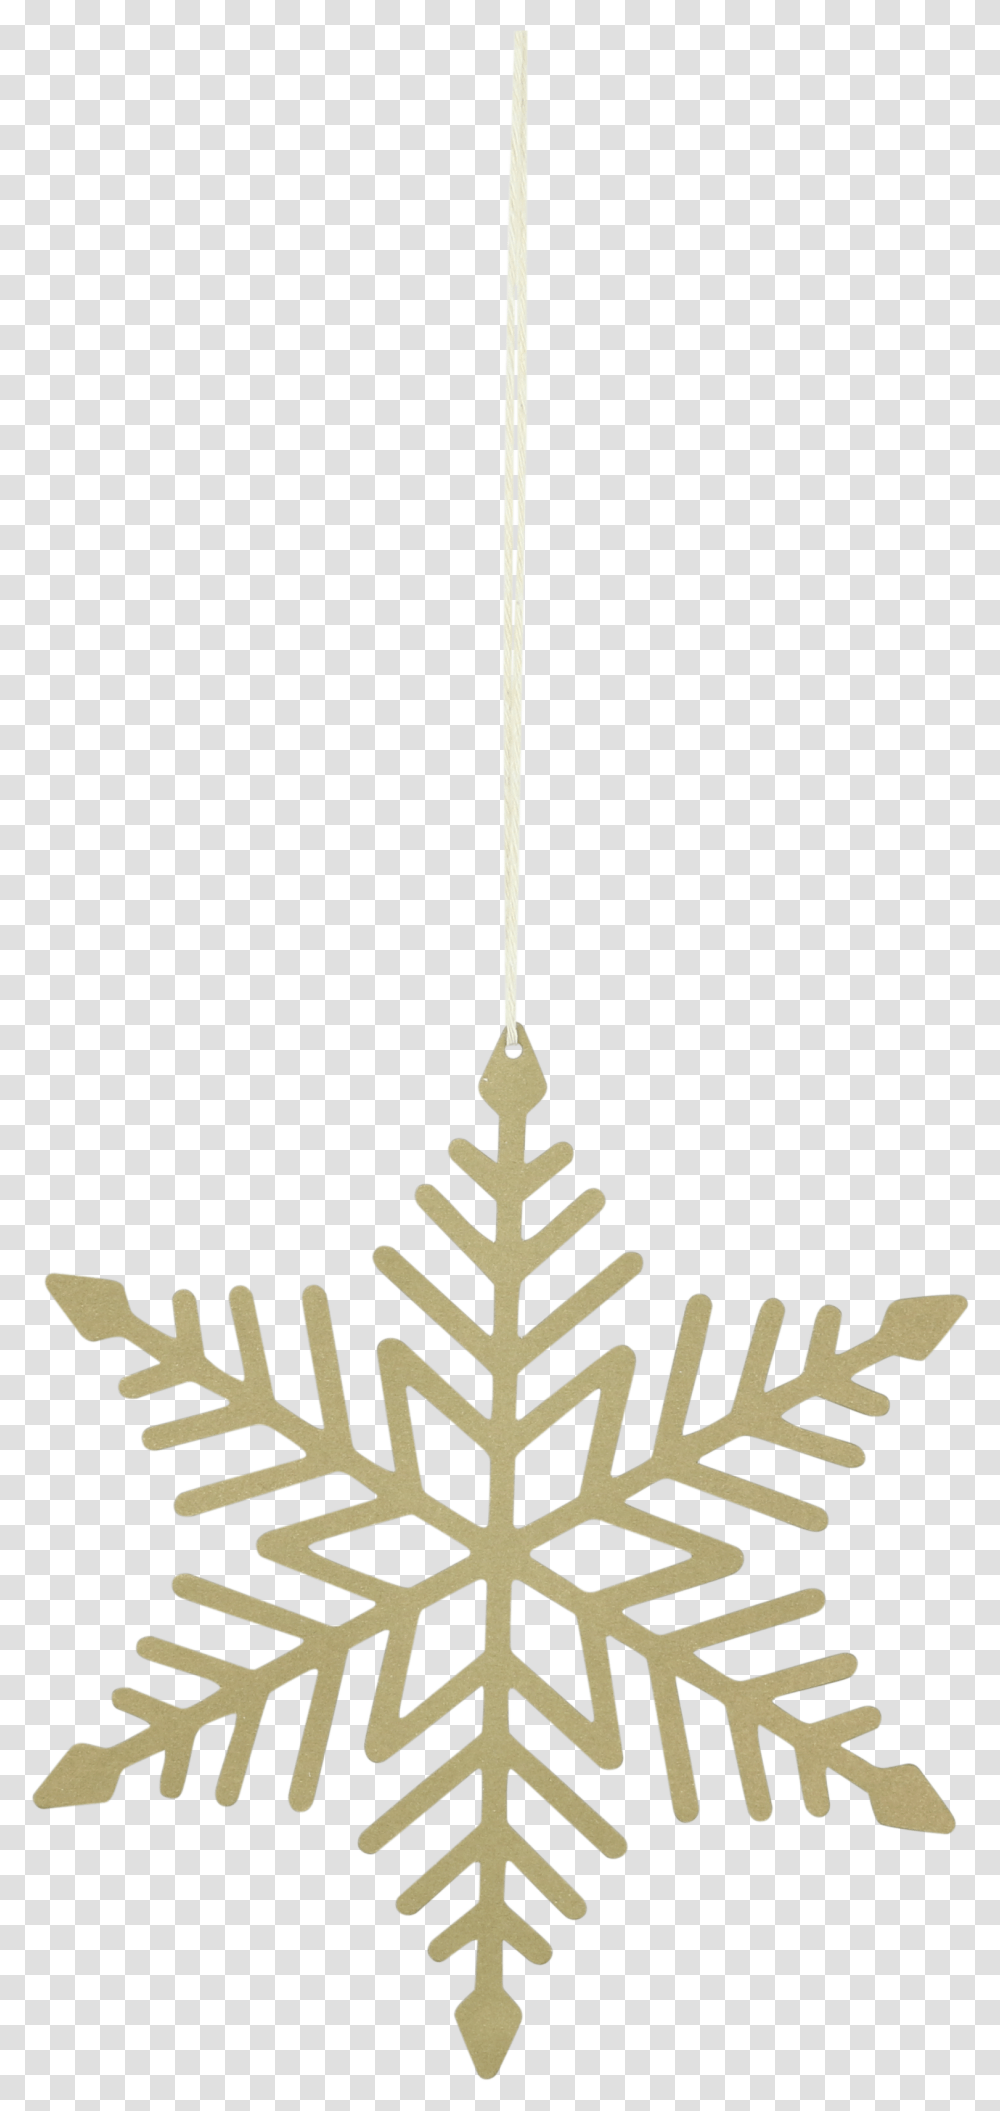 Traditional Christmas Snowflakes Snowflakes Black And White, Glass, Crystal, Gold Transparent Png